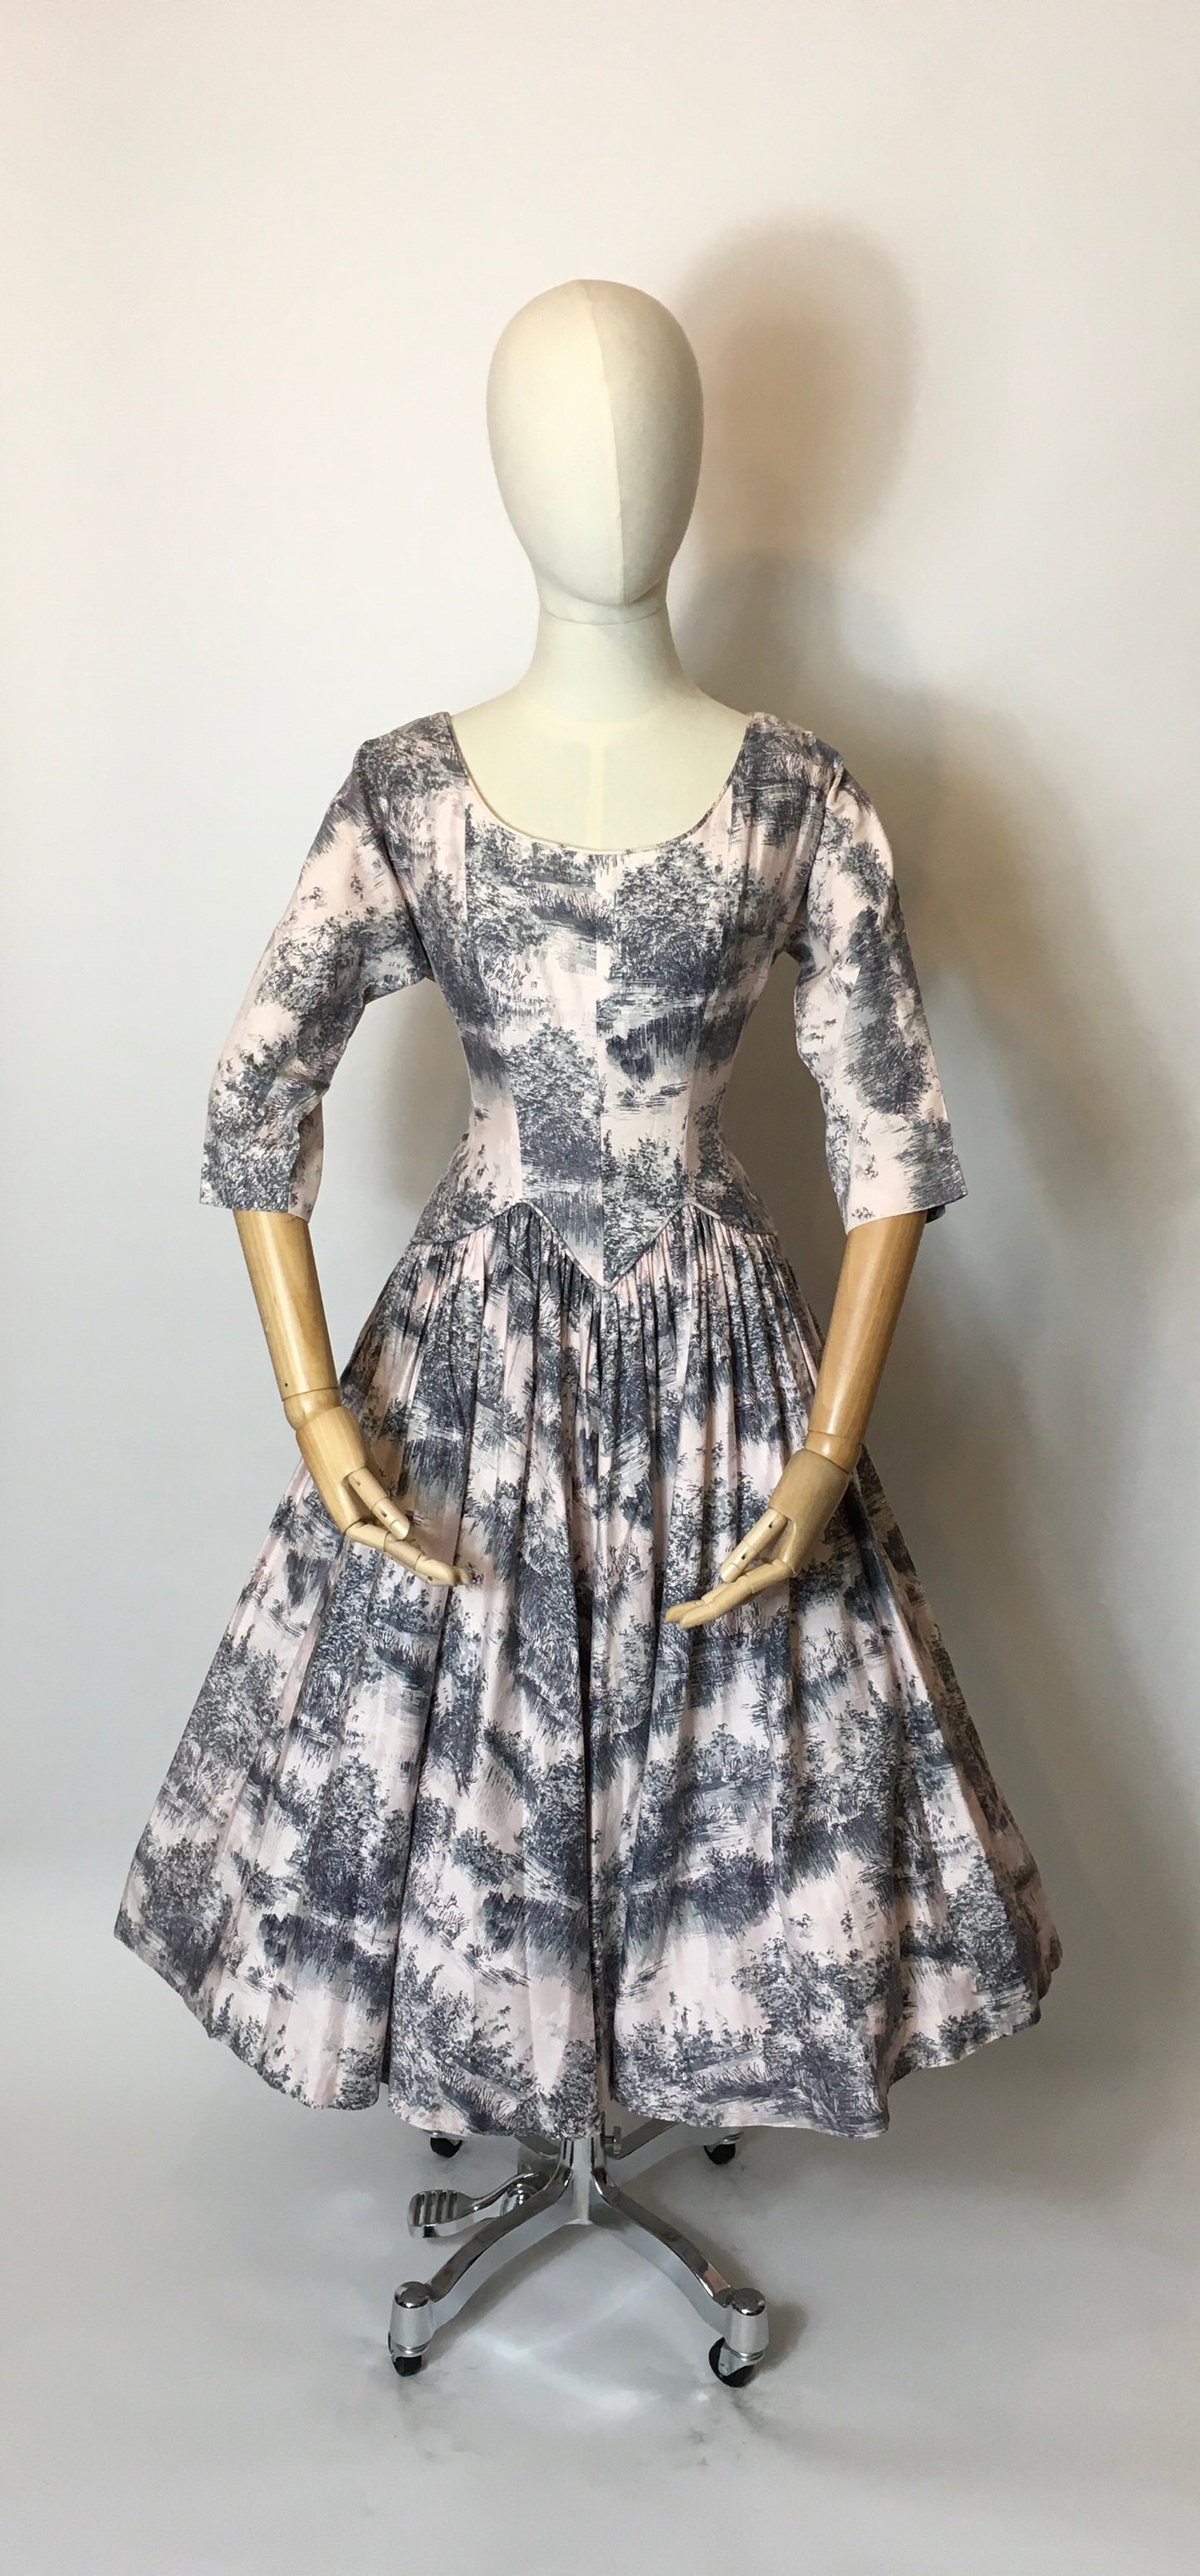 Original 1950s Darling Dress - In the Most Delicate Powder Pink with Charcoal Stencil Overlay Print